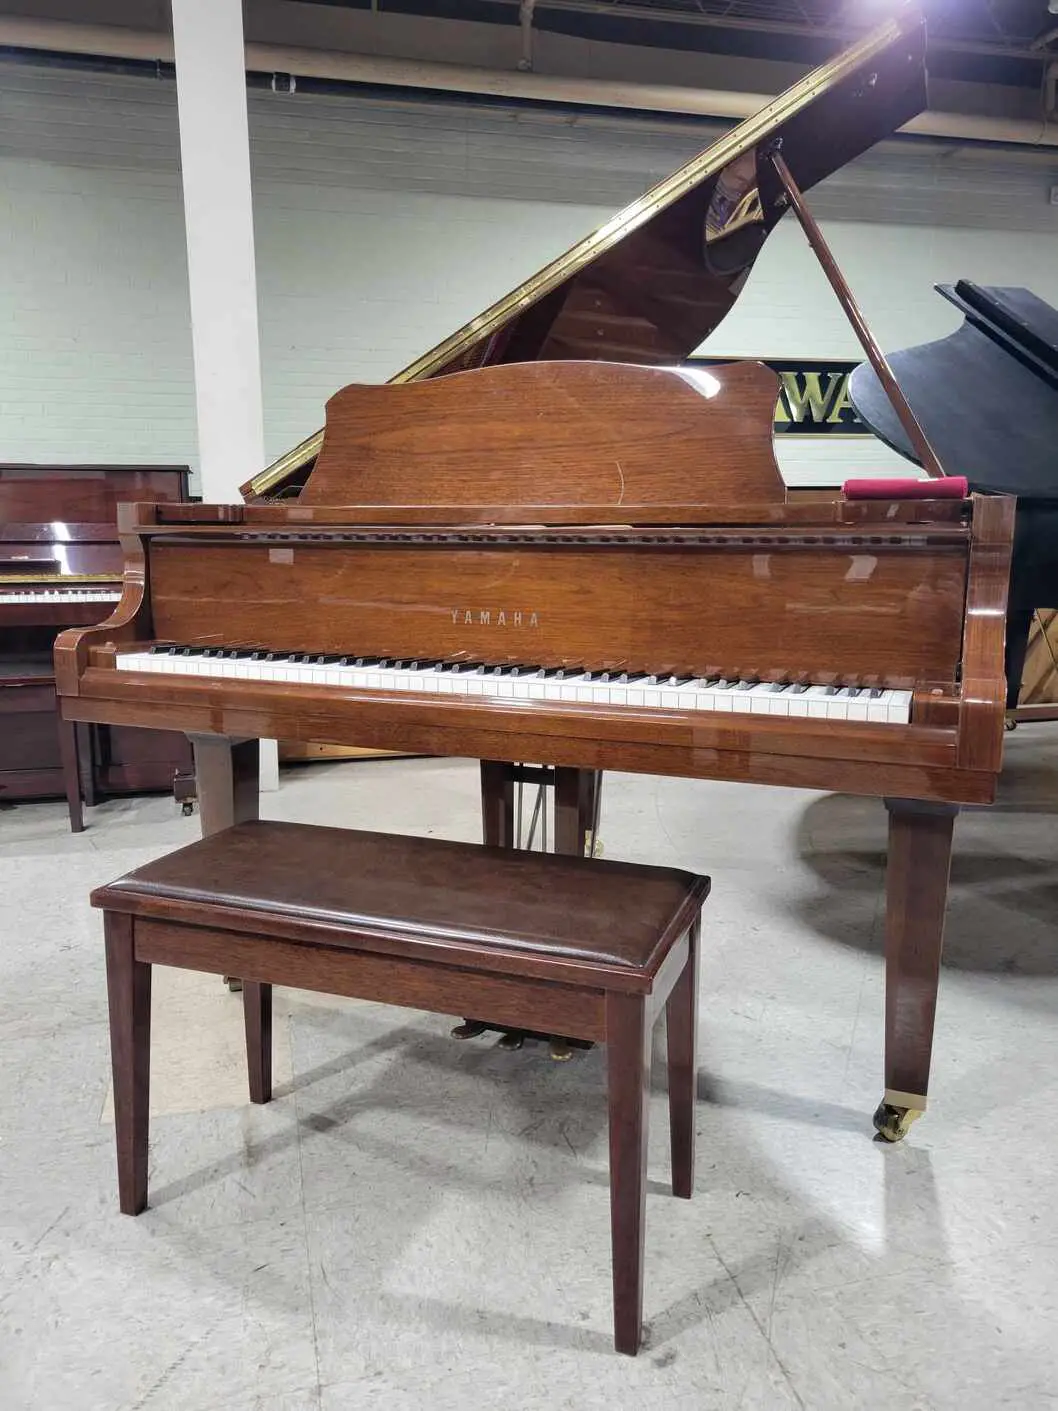 Yamaha GB1K 5' Baby Grand Piano In French Provincial Design